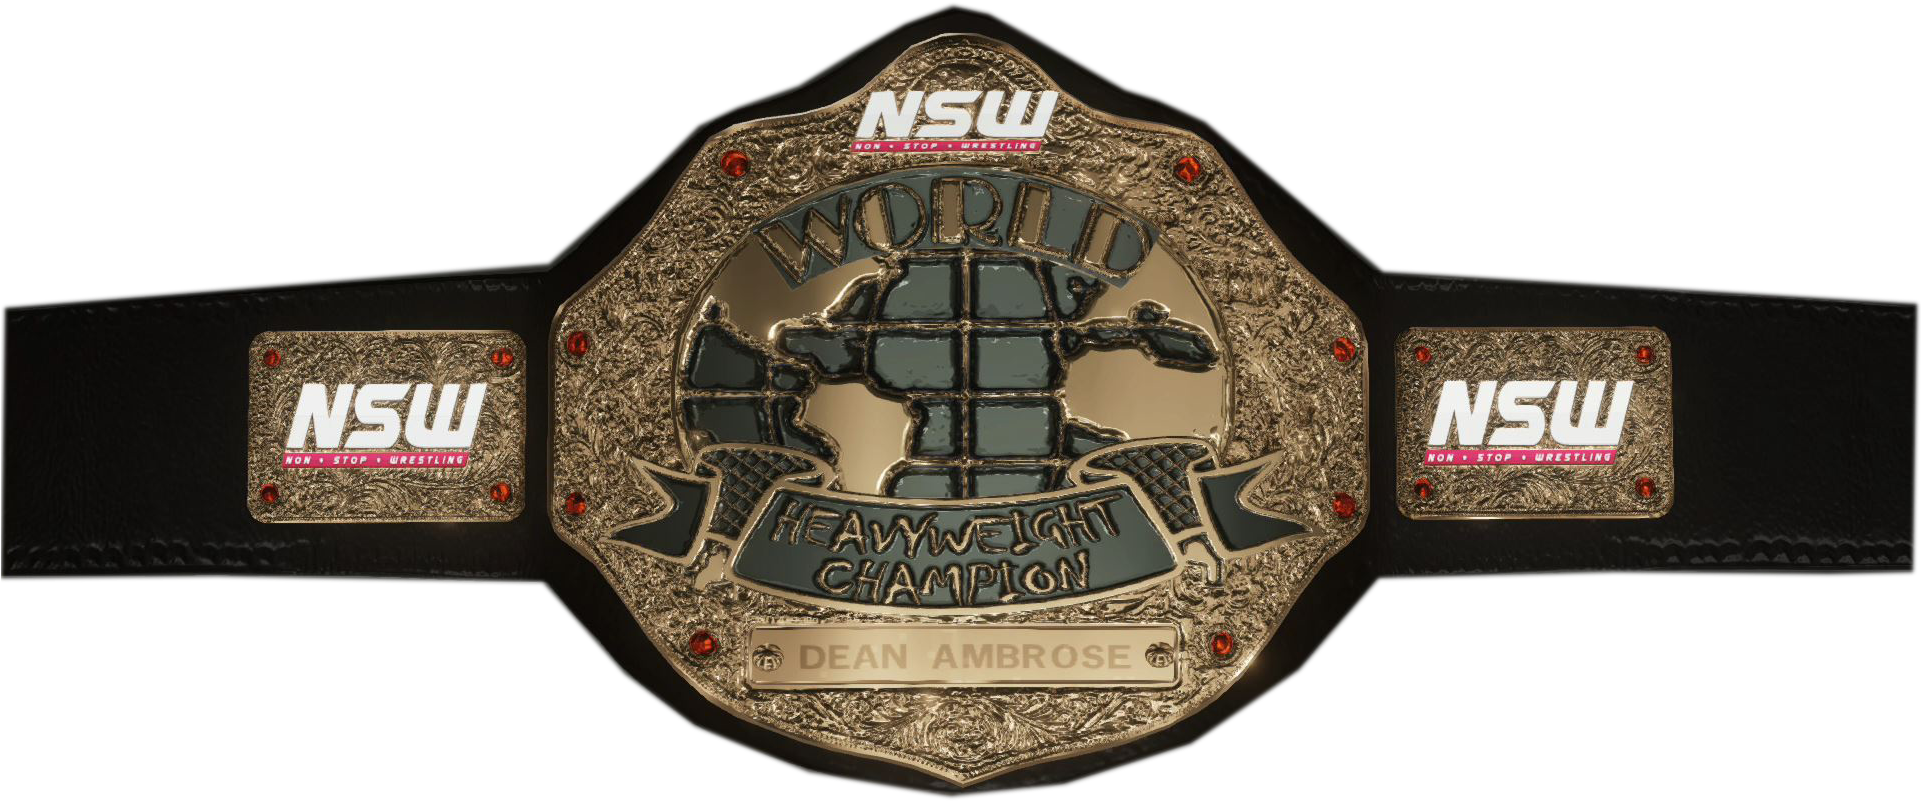 Download Nsw World Heavyweight Championship Badge Png Image With No Background Pngkey Com